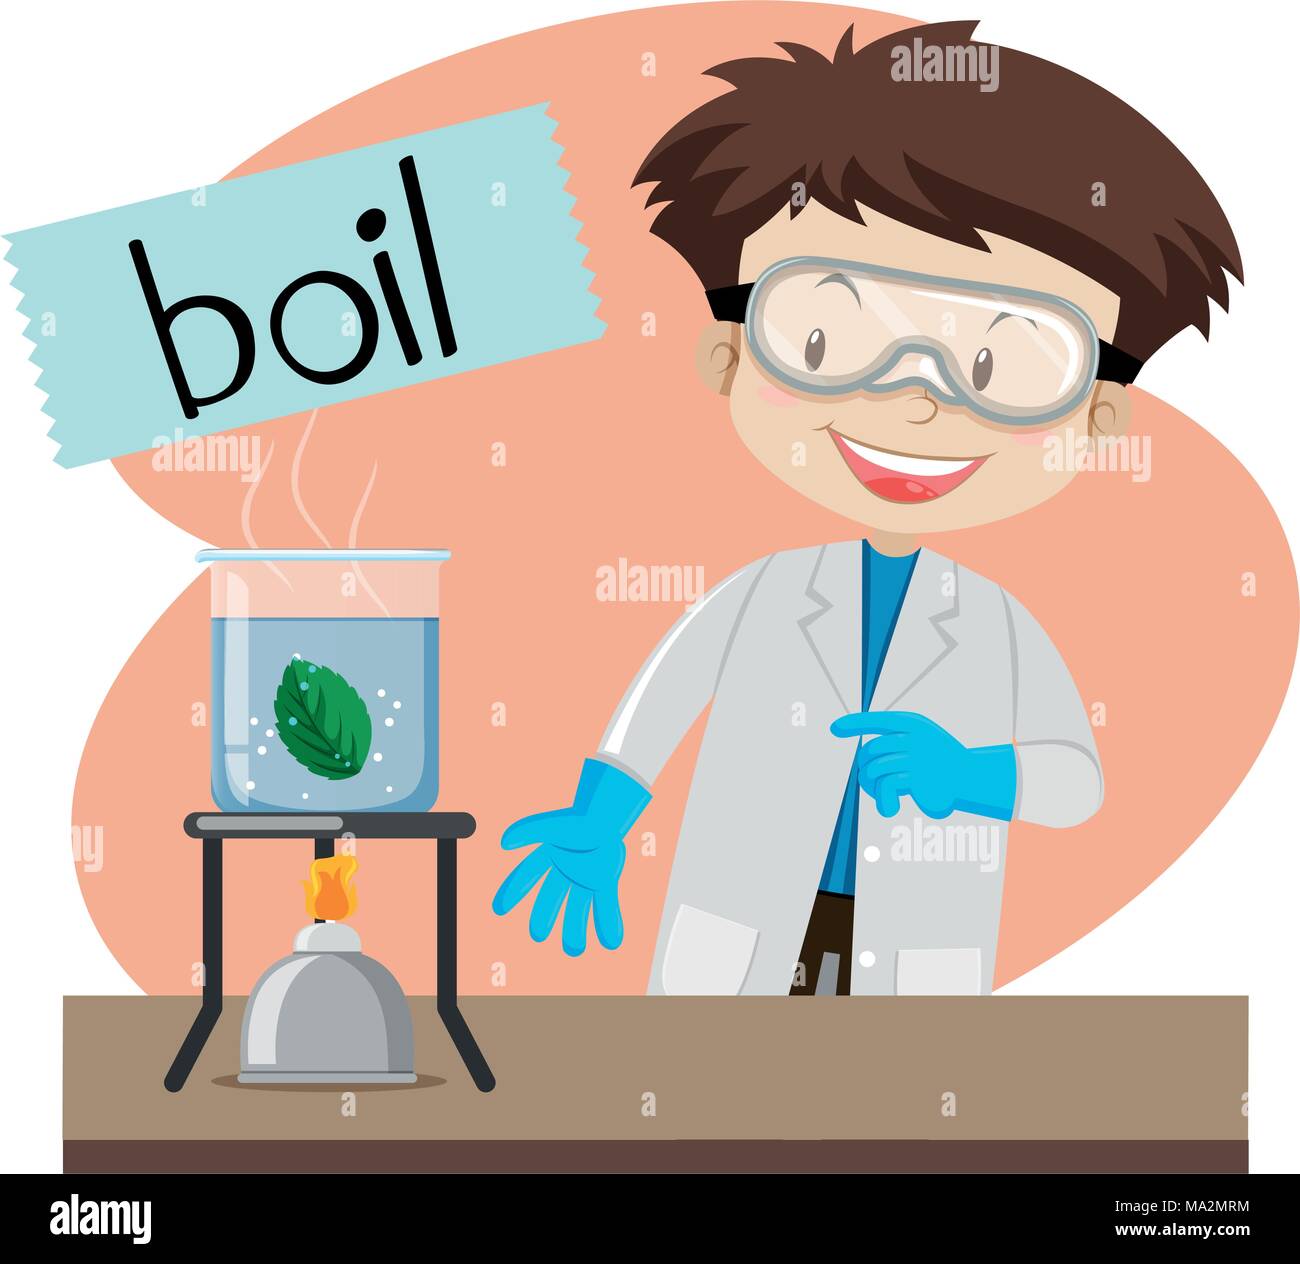 Wordcard for boil with boy doing science lab illustration Stock Vector